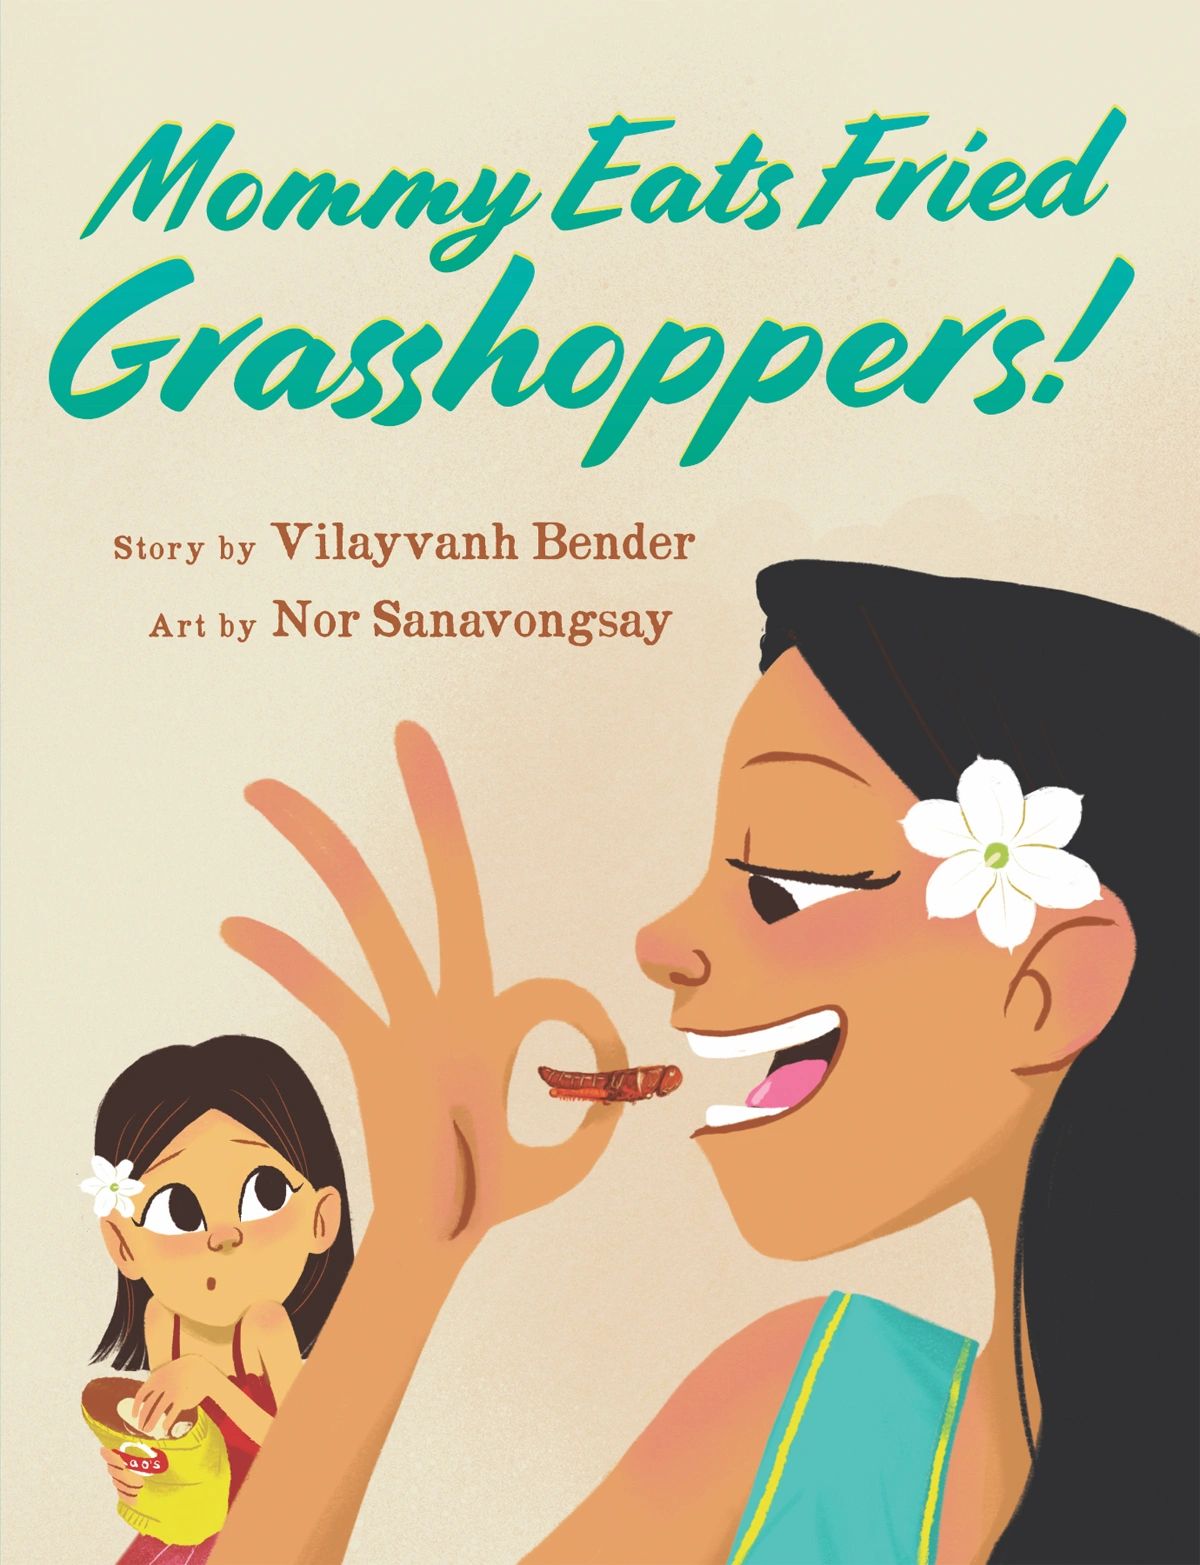 Picture of the book cover for Mommy Eats Fried Grasshoppers